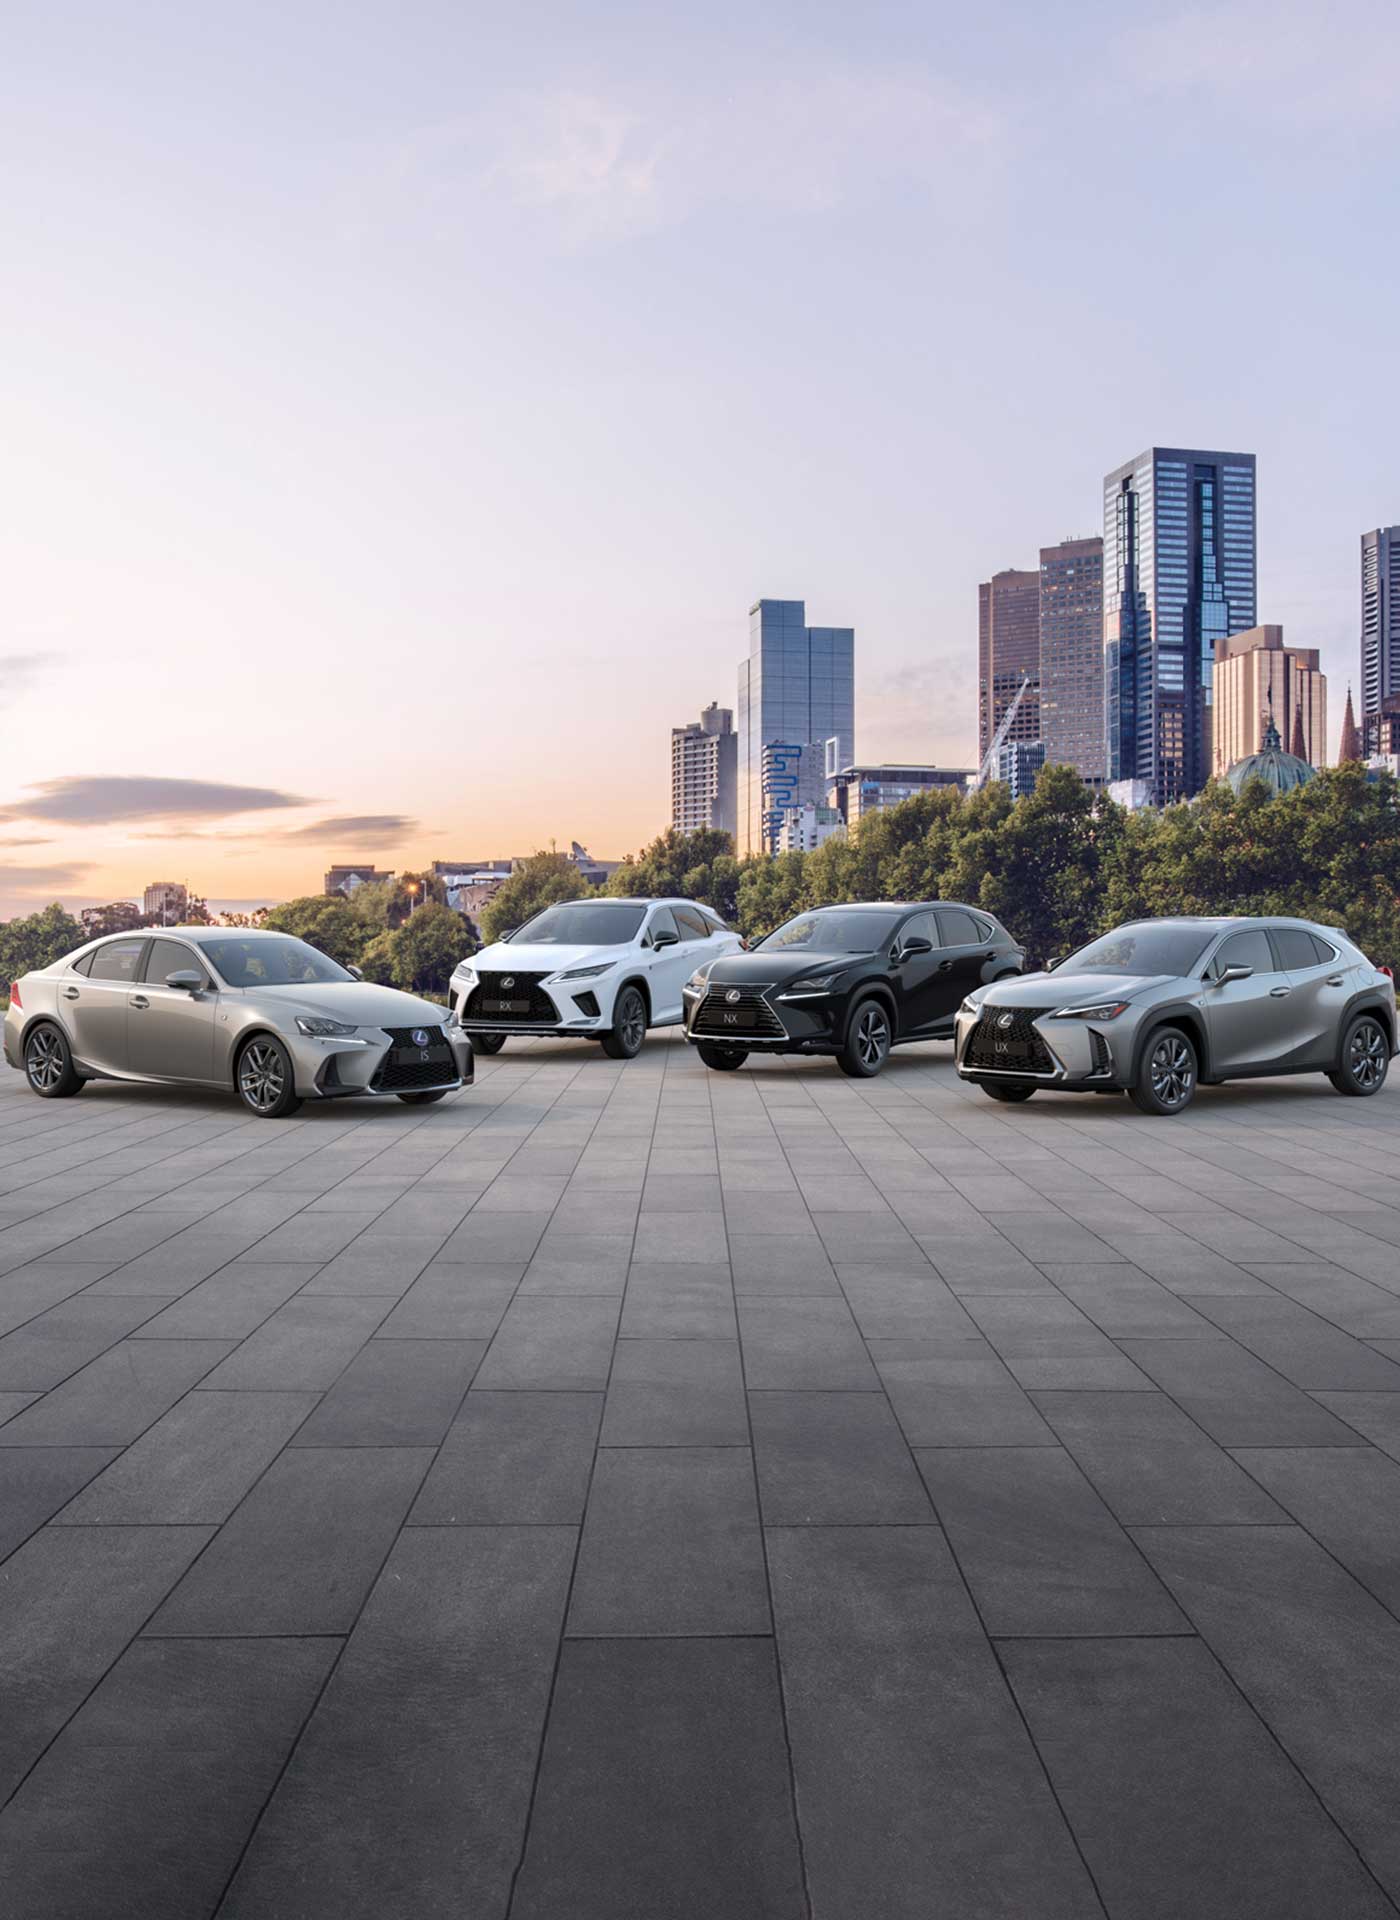 Lexus IS, RX, NX and UX 2020 models